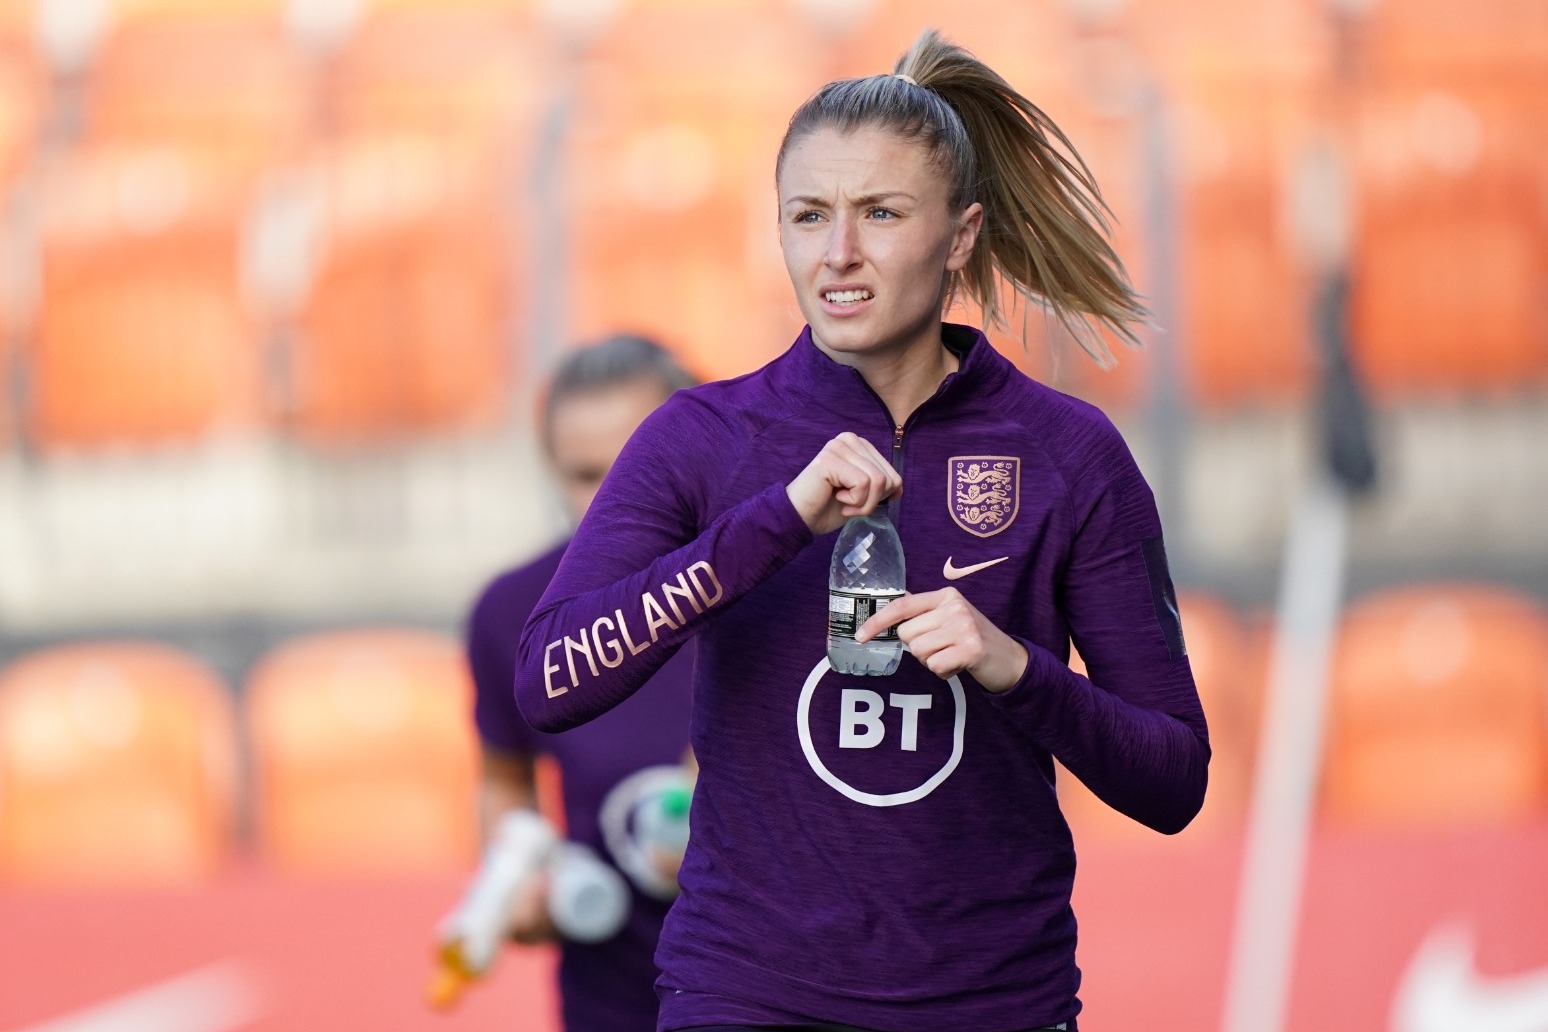 England Women appoint Arsenals Leah Williamson as captain for Euro 2022